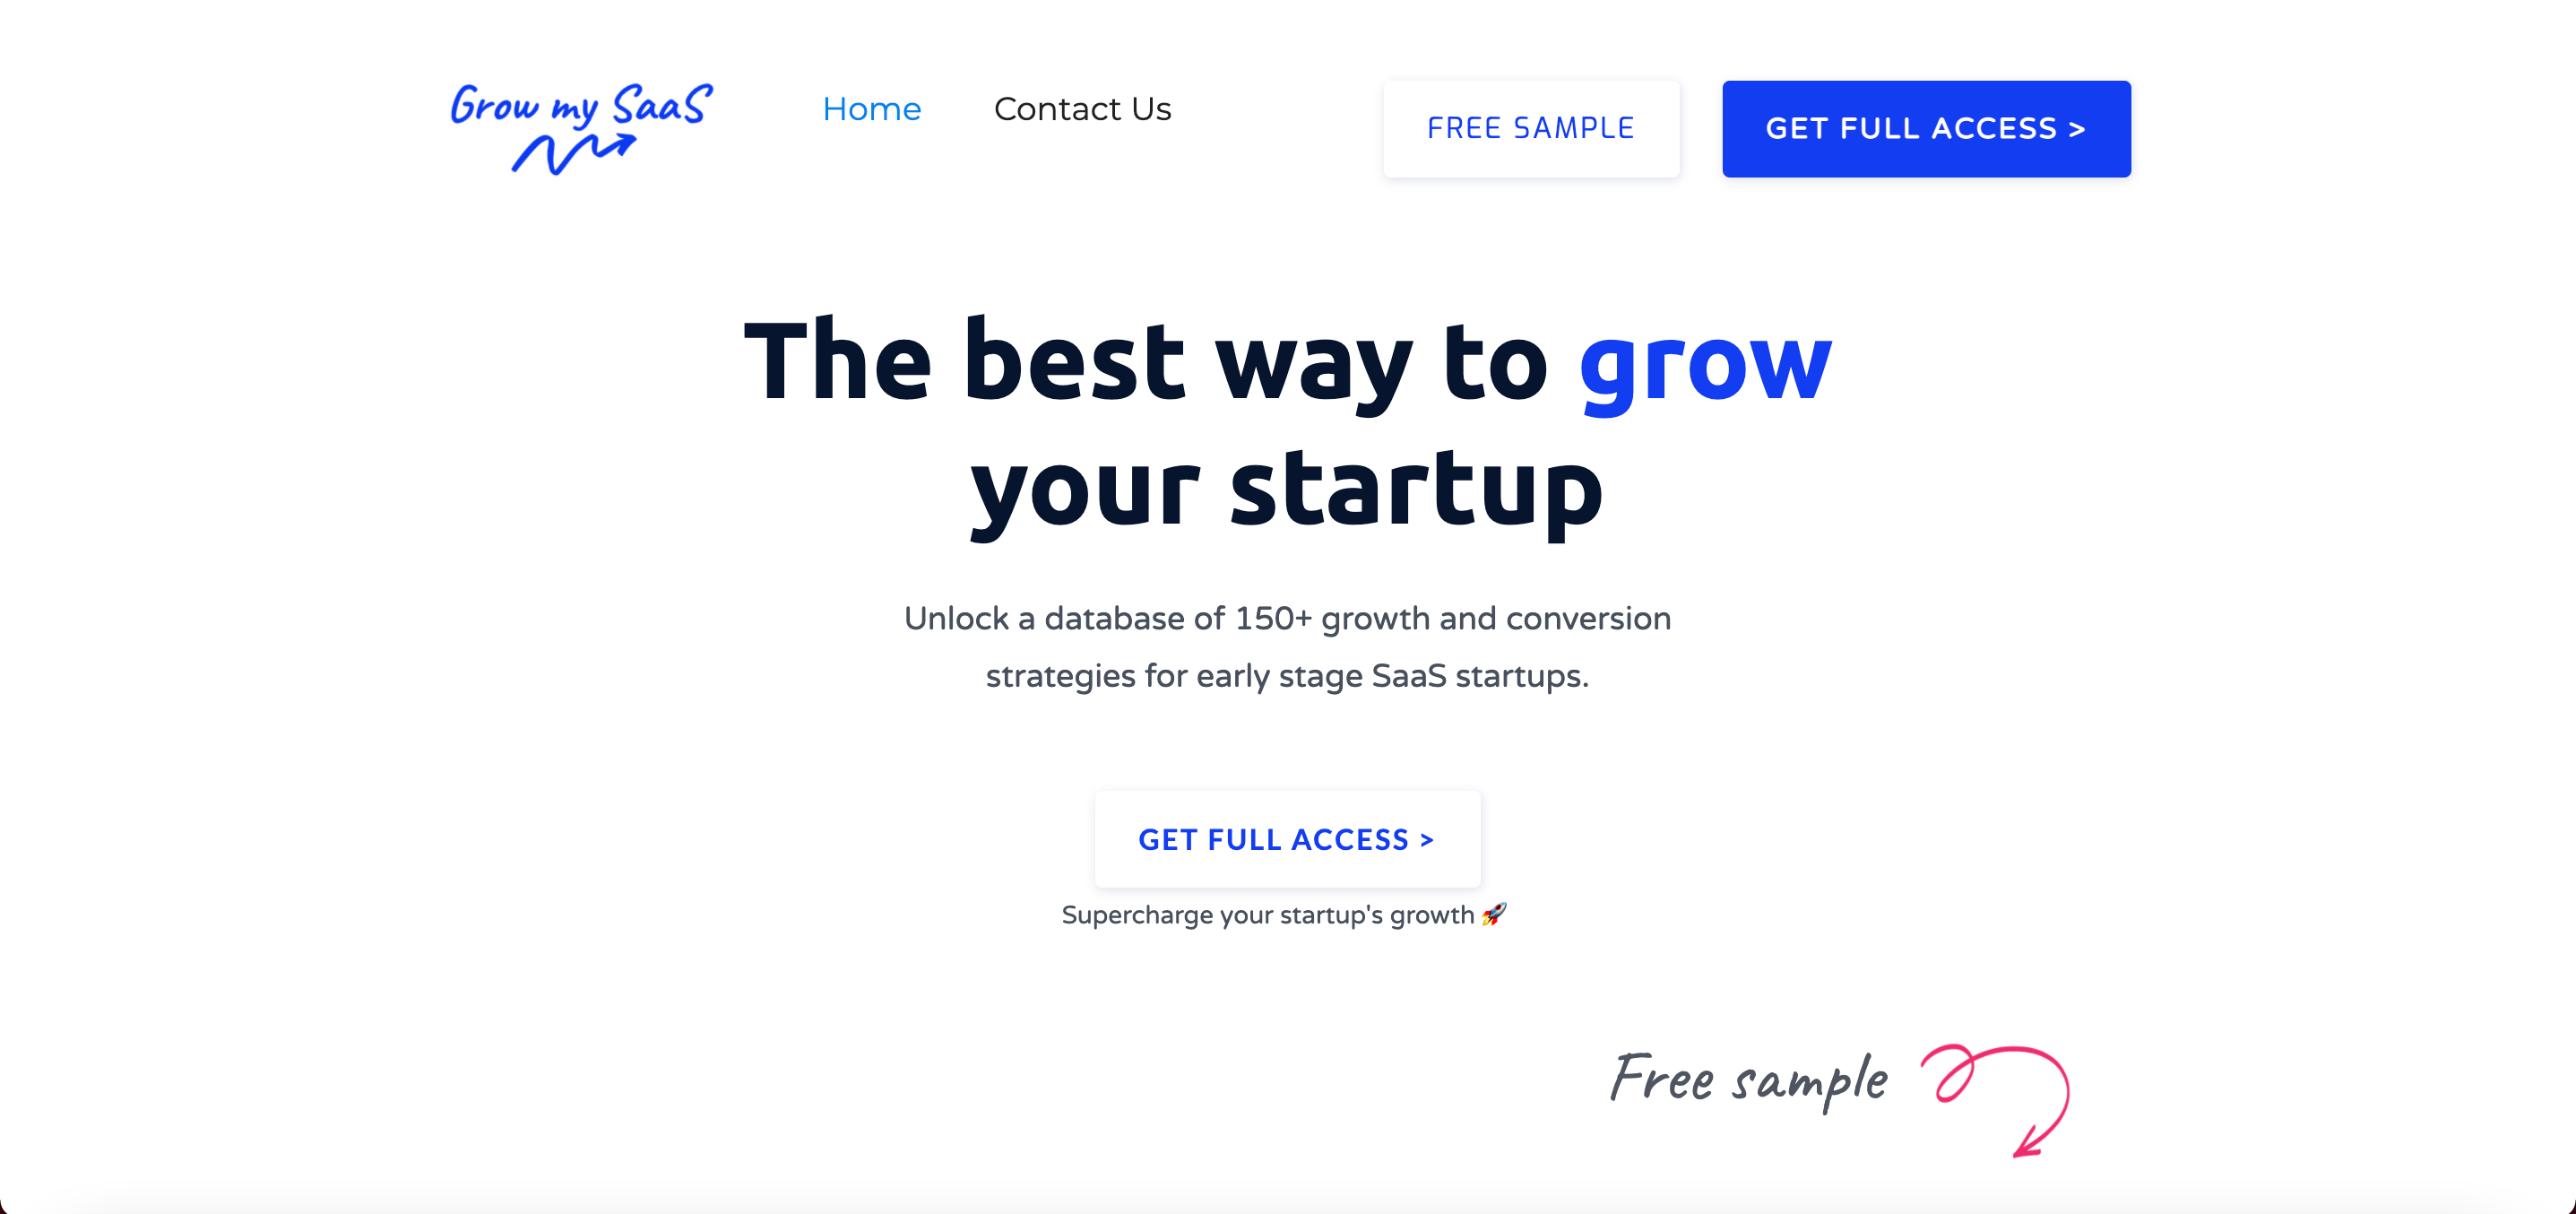 Find detailed information about GrowmySaaS